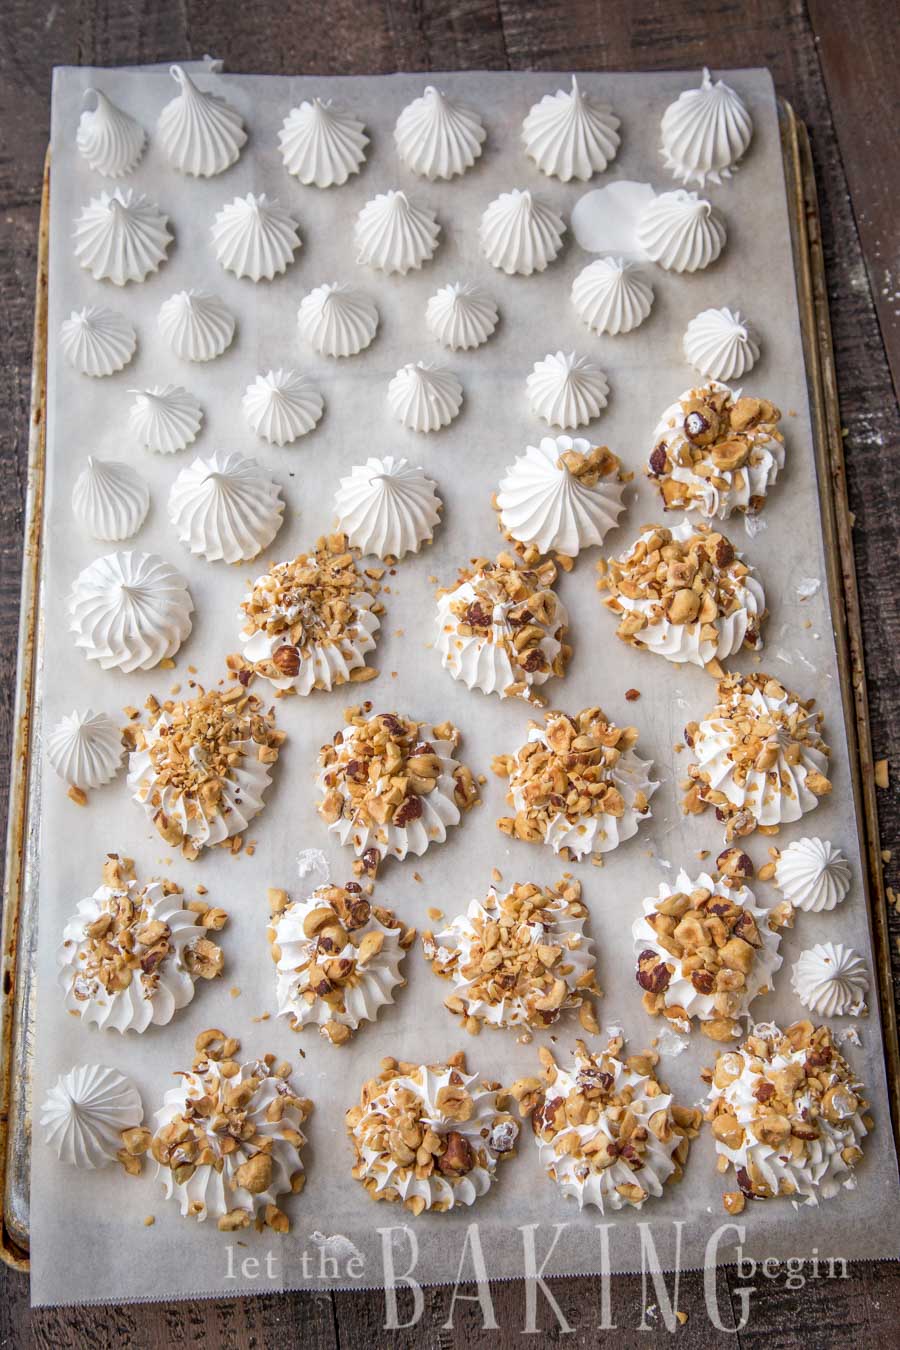 Half meringues on a parchment-lined a baking sheet with half of the half meringues topped with hazelnuts.